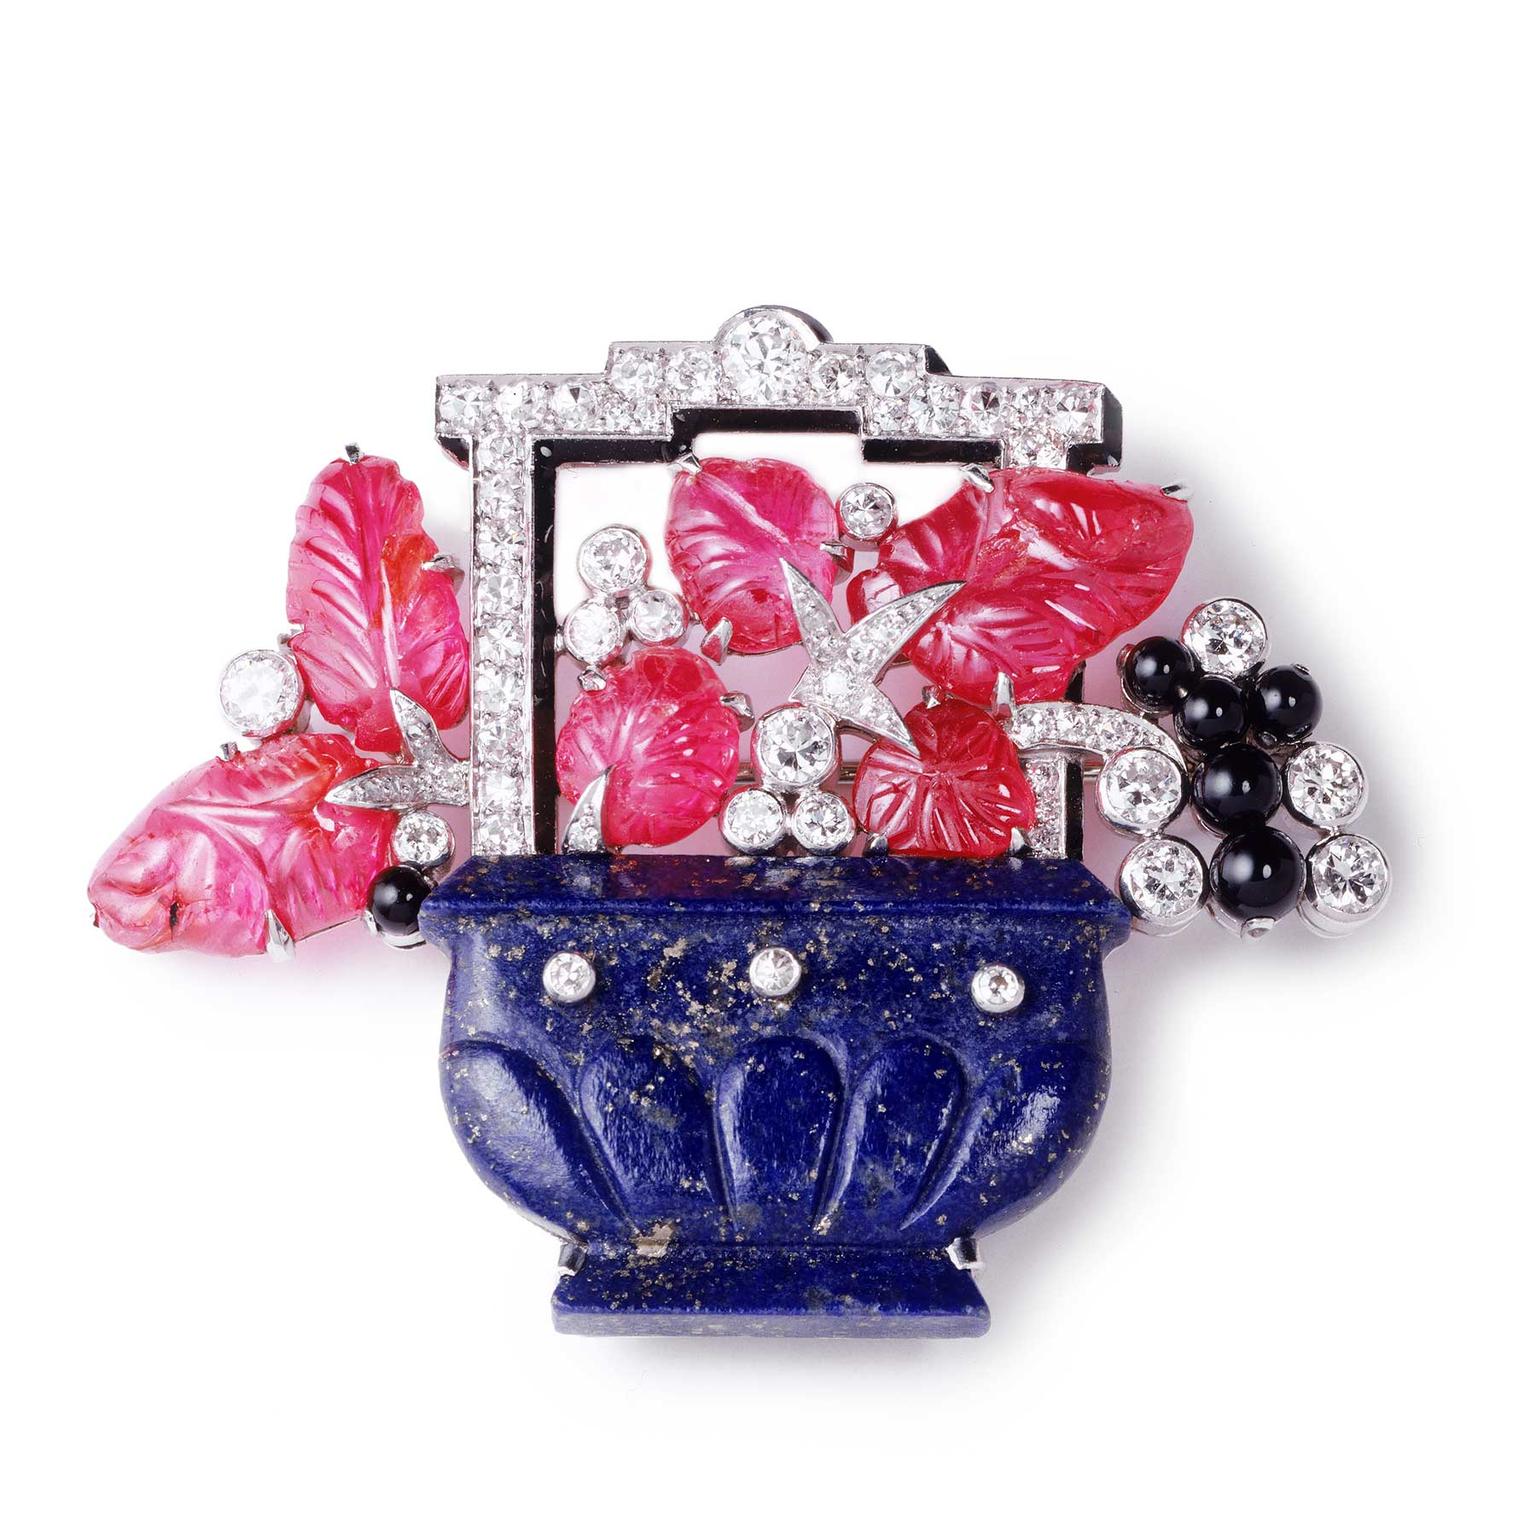 Cartier Collection lapis lazuli Chinese vase brooch, 1927